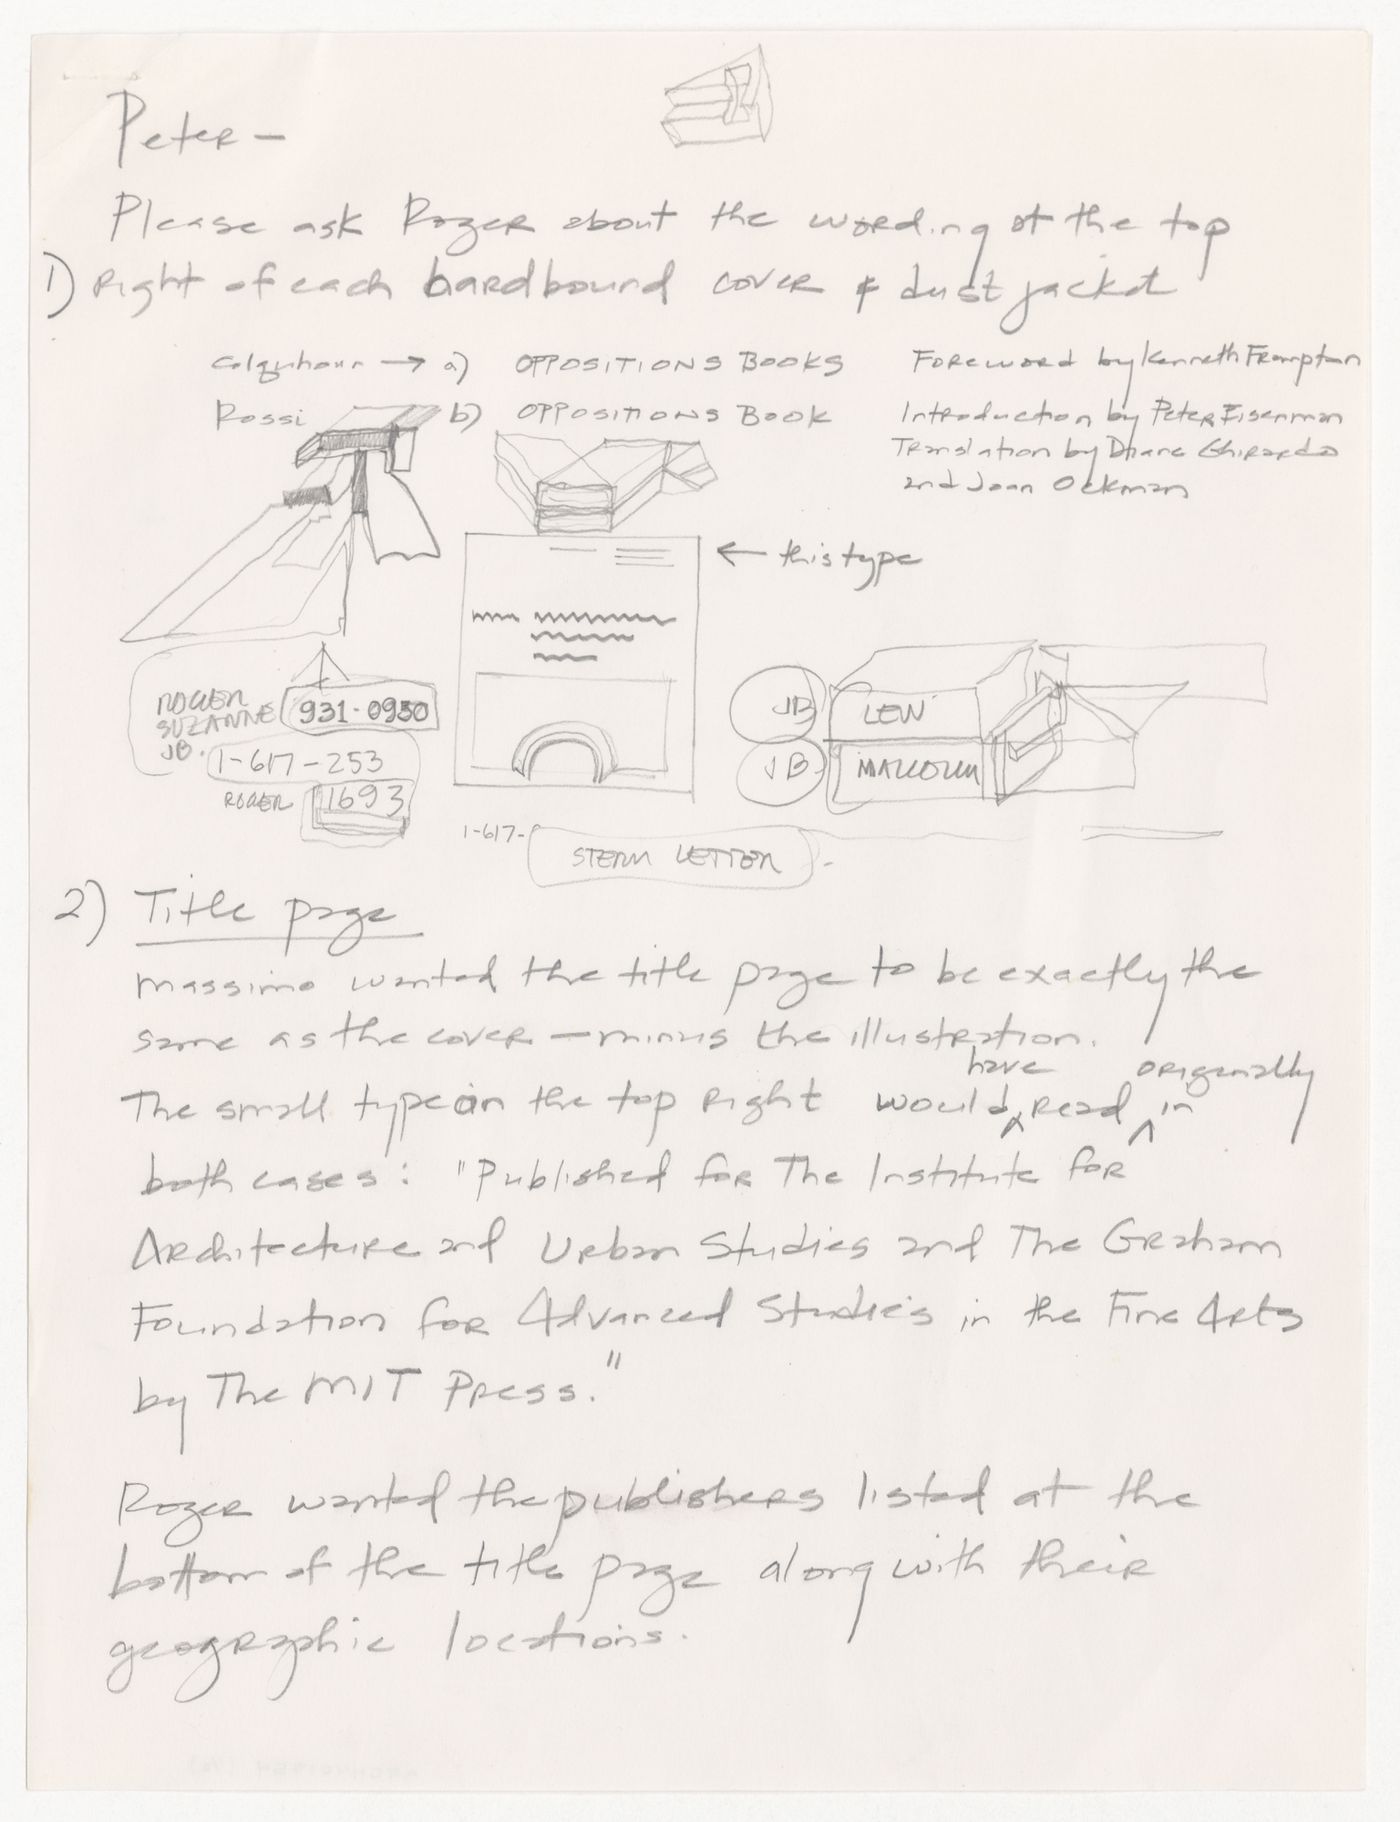 Notes by Lindsay Stamm Shapiro to Peter D. Eisenman about format of Oppositions Books covers and title pages